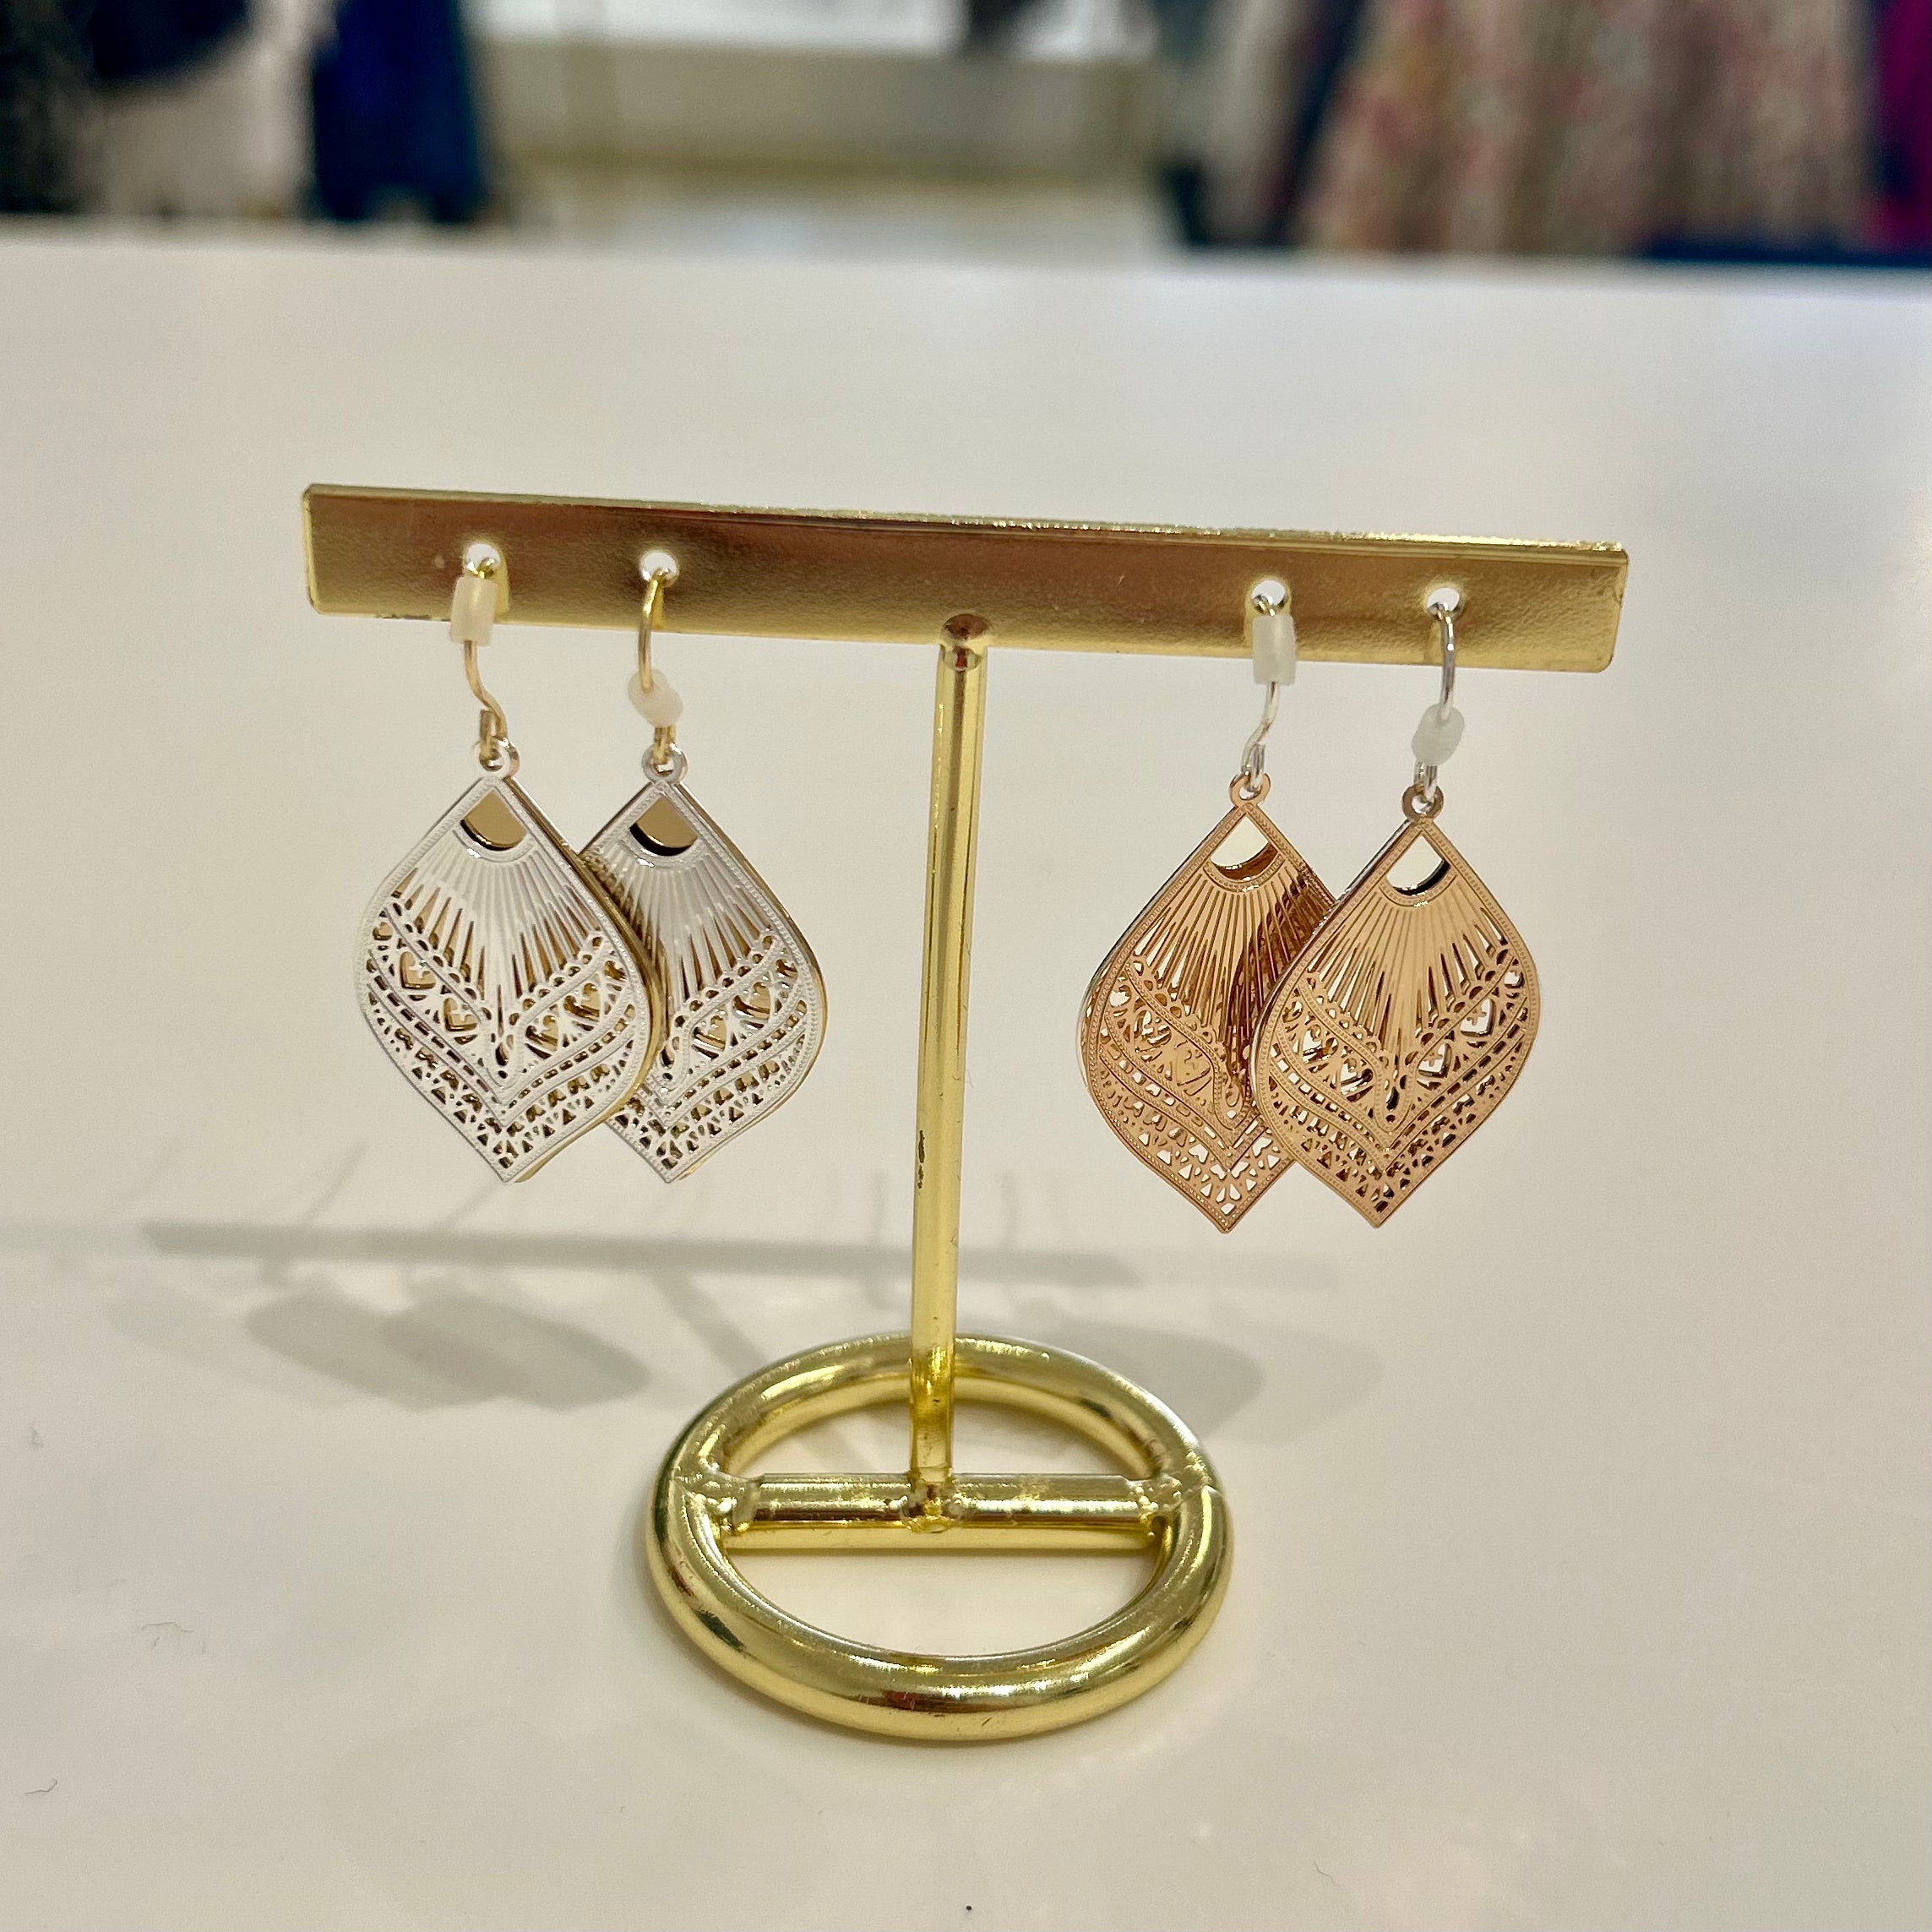 Silver Leaf Earrings with Rose Gold Filagree Overlay.